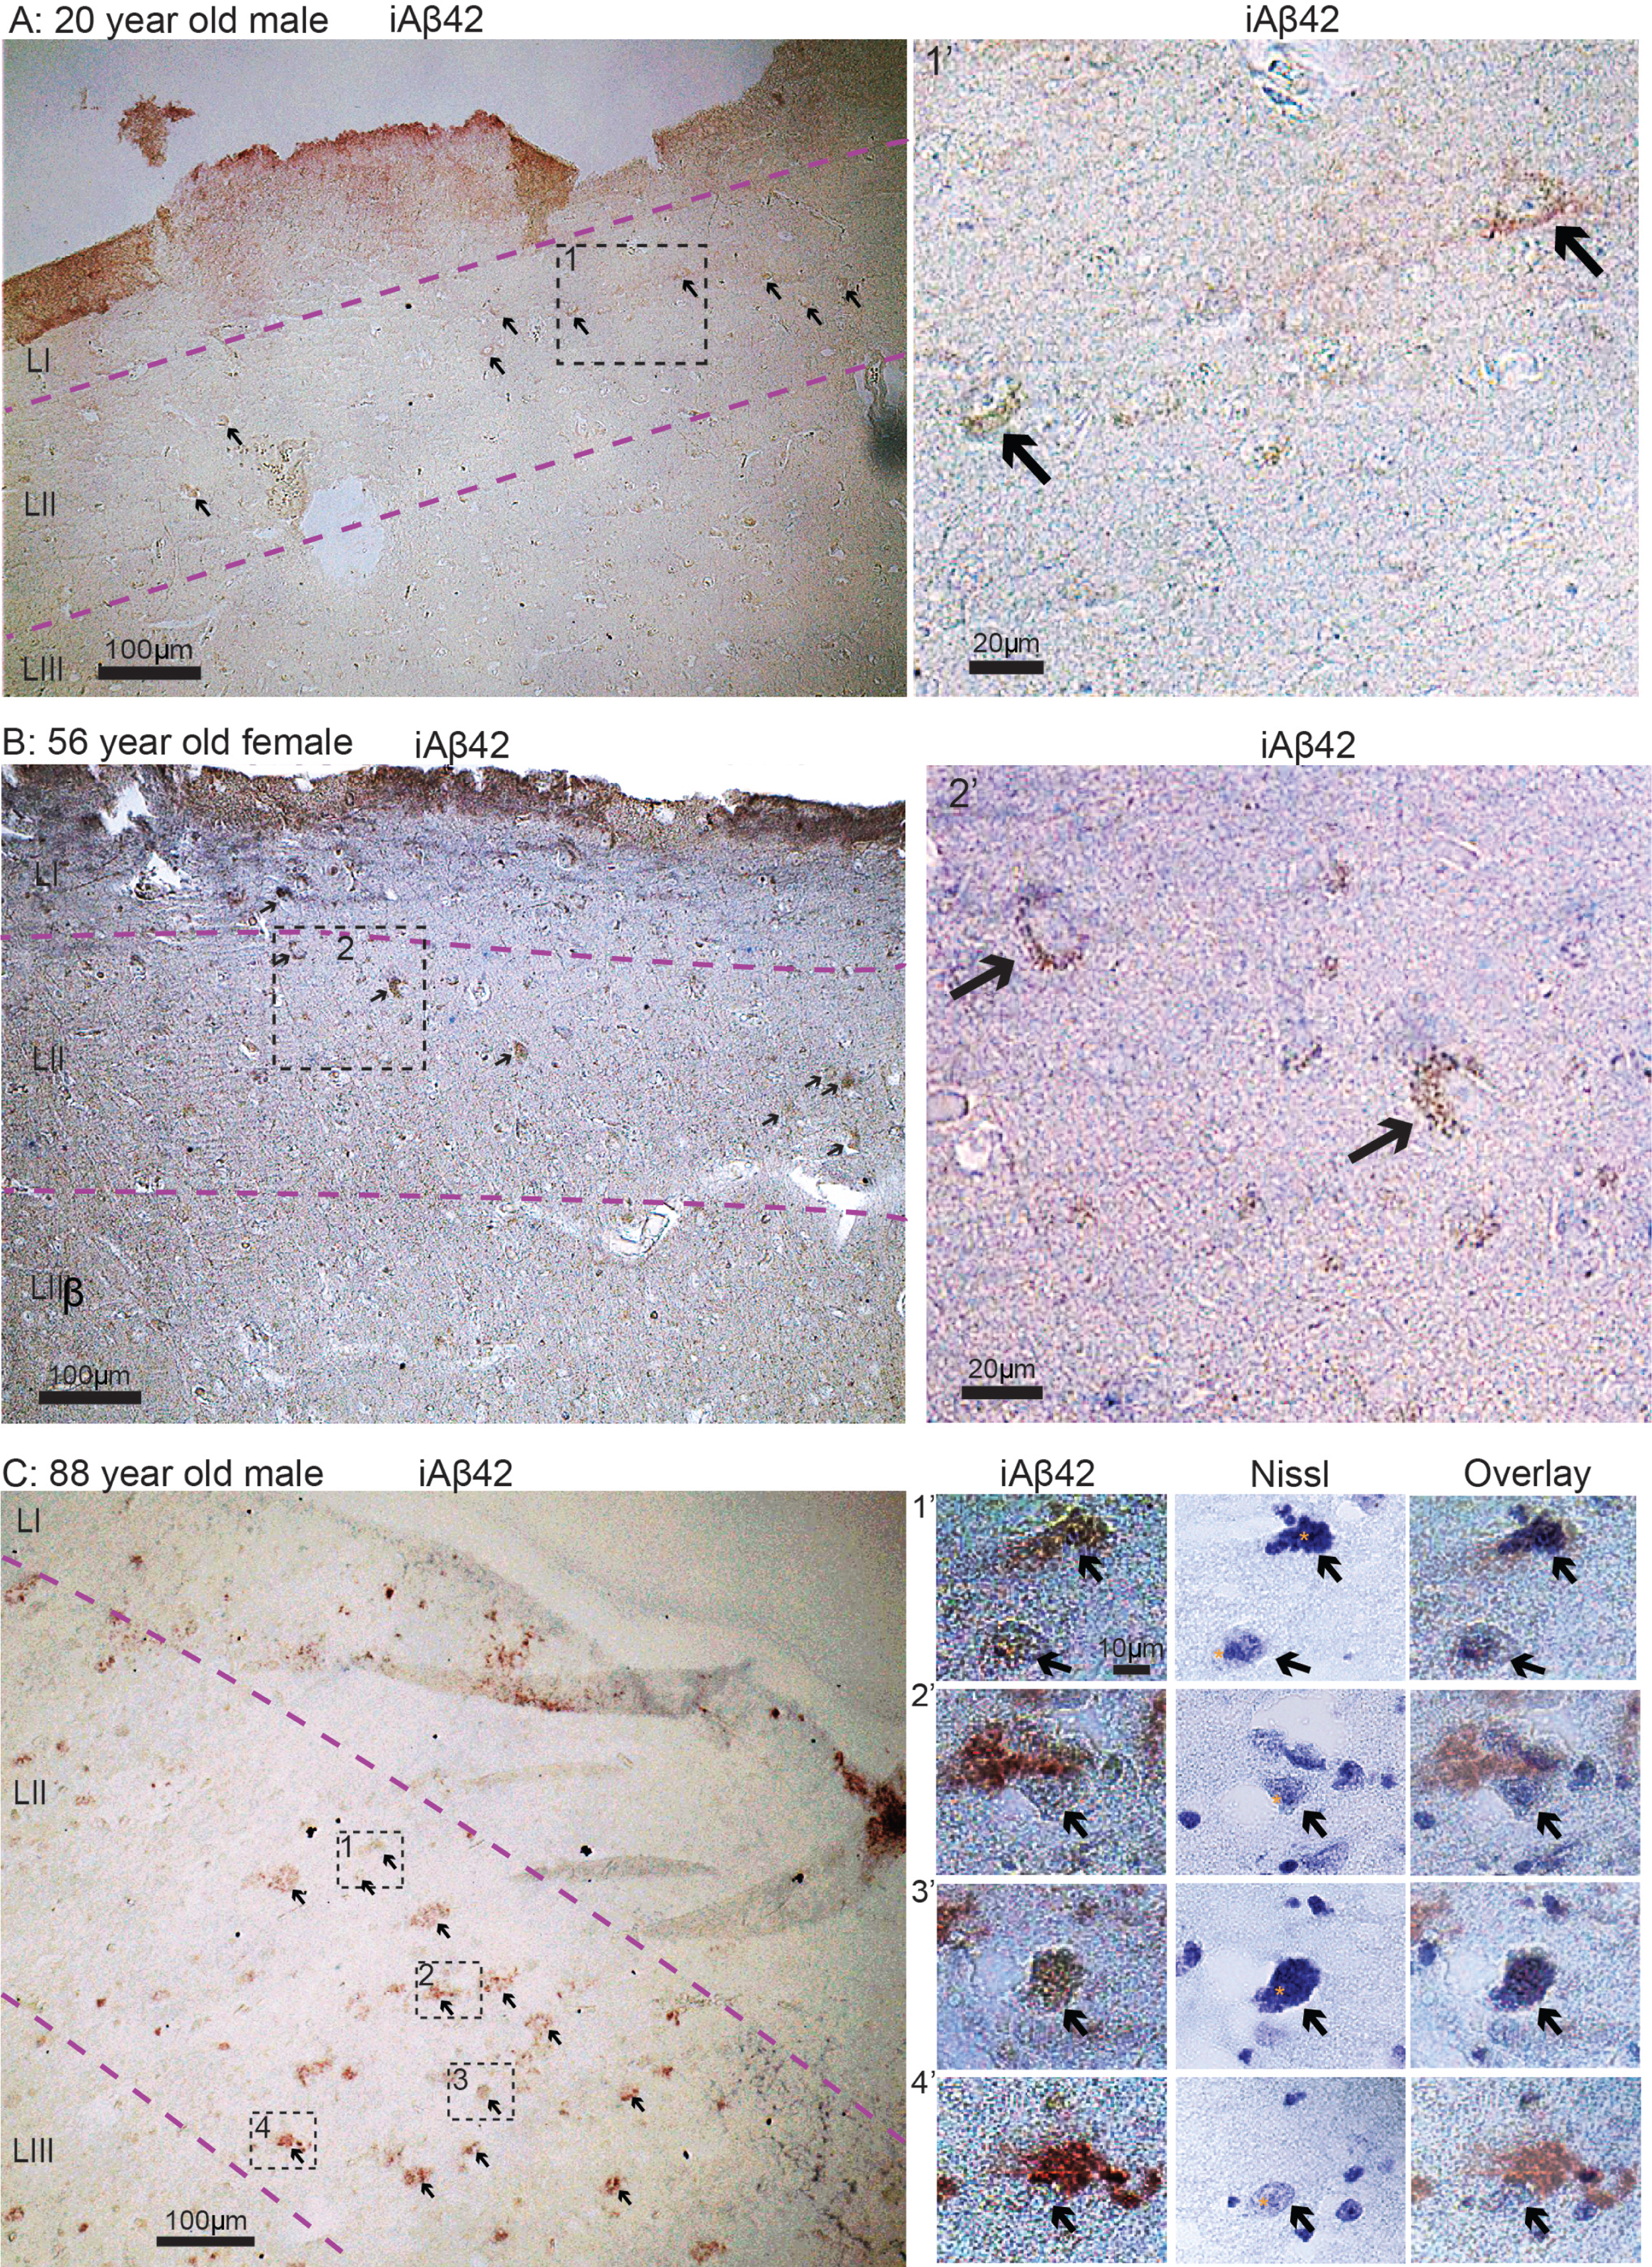 iAβ42 is present in entorhinal cortex layer II neurons in human subjects free of neurological disease. A) 20-year-old male. B) 56-year-old female. C) 88-year-old male. Overview images in (A-C) were taken with a 10x objective, insets for (A) and (B) were taken with a 20x objective, while insets for (C) were taken with a 100x oil immersion objective. Immunolabelling and Nissl staining is indicated for each image/panel. Stippled lines in light magenta indicate layers. To indicate nucleoli in the middle panels of (C), we have placed a small asterisk immediately to the left of each. Scale bars are indicated for each image/panel (in (C), the scale bar in top left image applies to all in this panel).